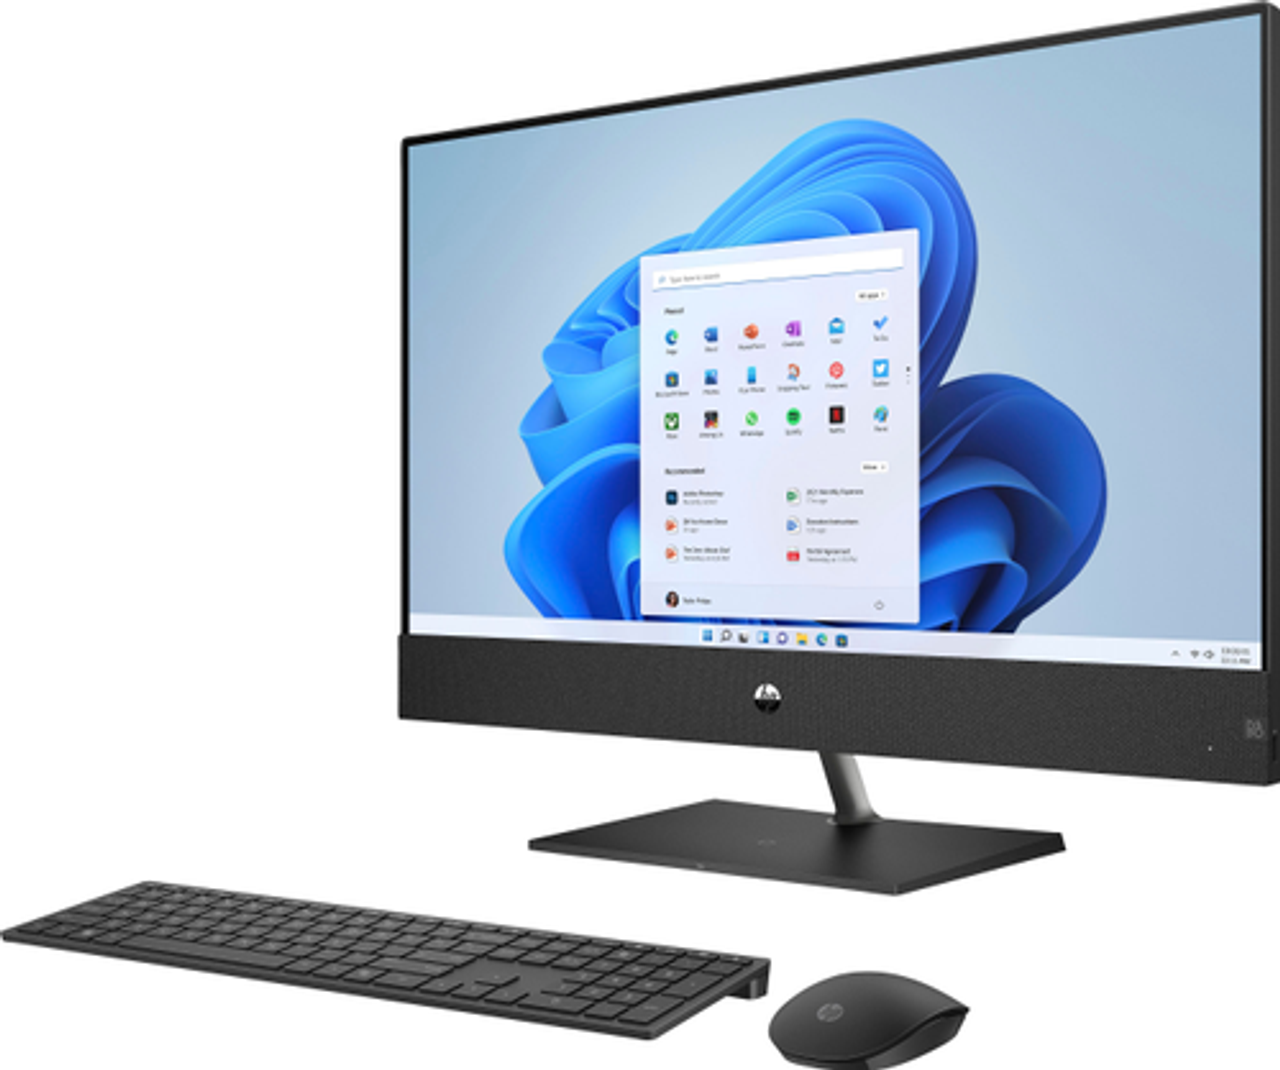 HP - Pavilion 27" Full HD Touch-Screen All-in-One - Intel Core i7 - 16GB Memory - 1TB SSD - Sparkling Black